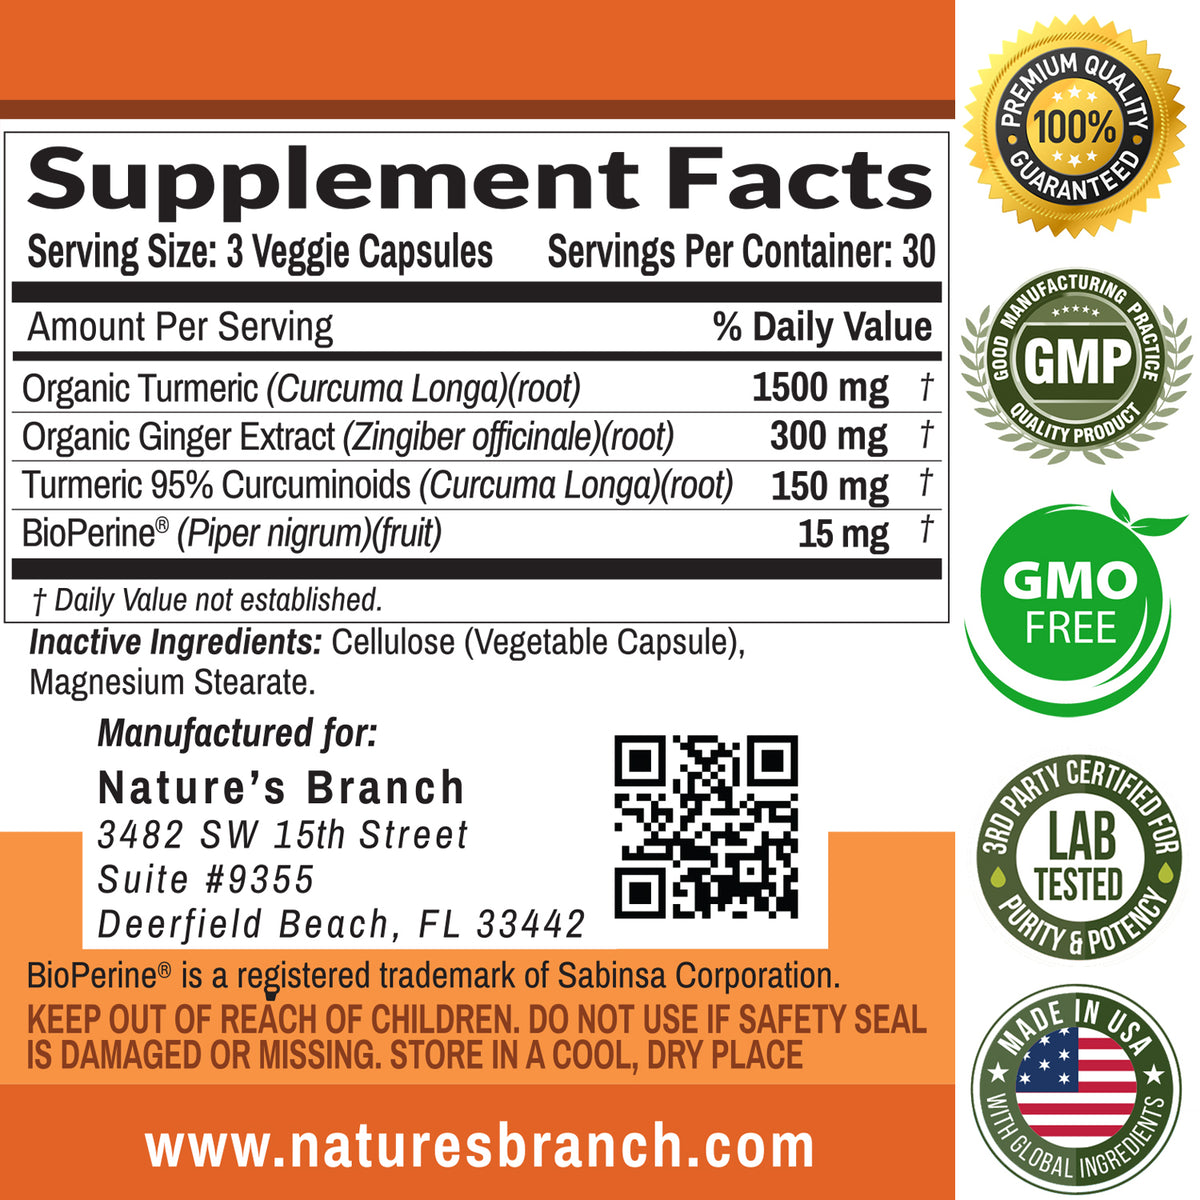 Nature&#39;s Branch Turmeric and Ginger with BioPerine Supplement Facts and ingredients panel